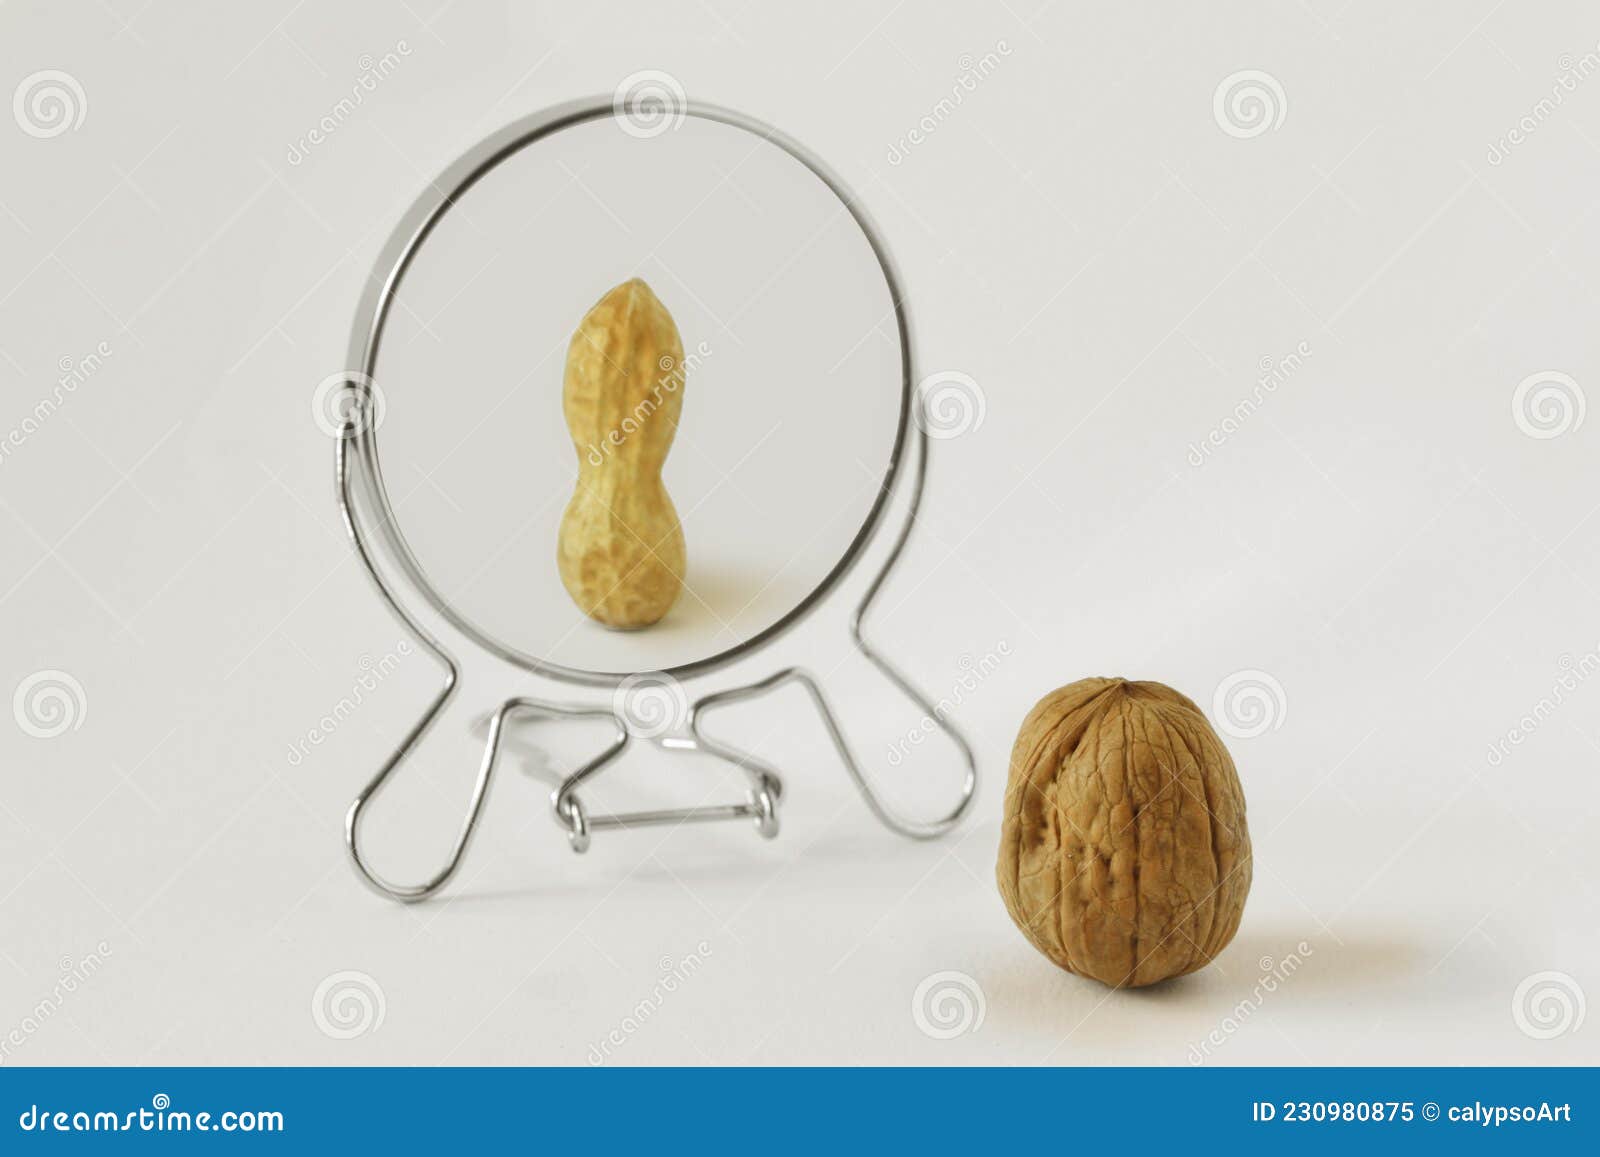 walnut looking in the mirror and seeing itself as a peanut - concept of dysmorphobia and distorted self-image